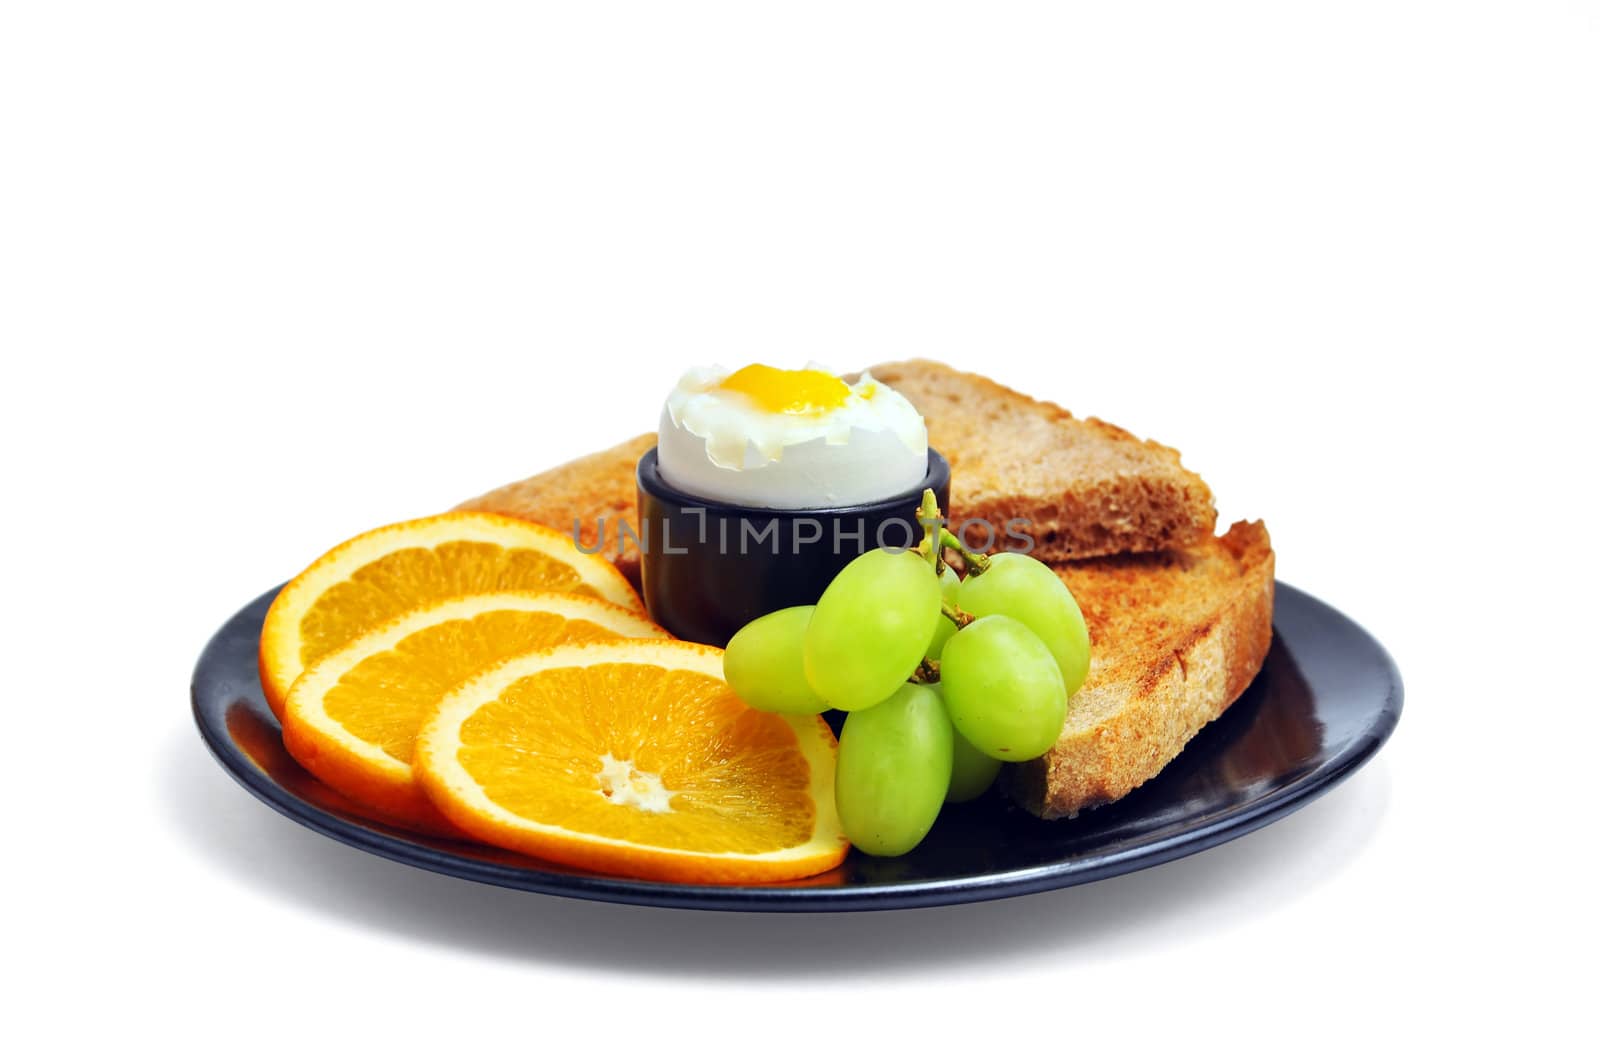 Perfect healthy breakfast: hard boiled egg, slices of oranges, green grapes and multigrain toasted bread.